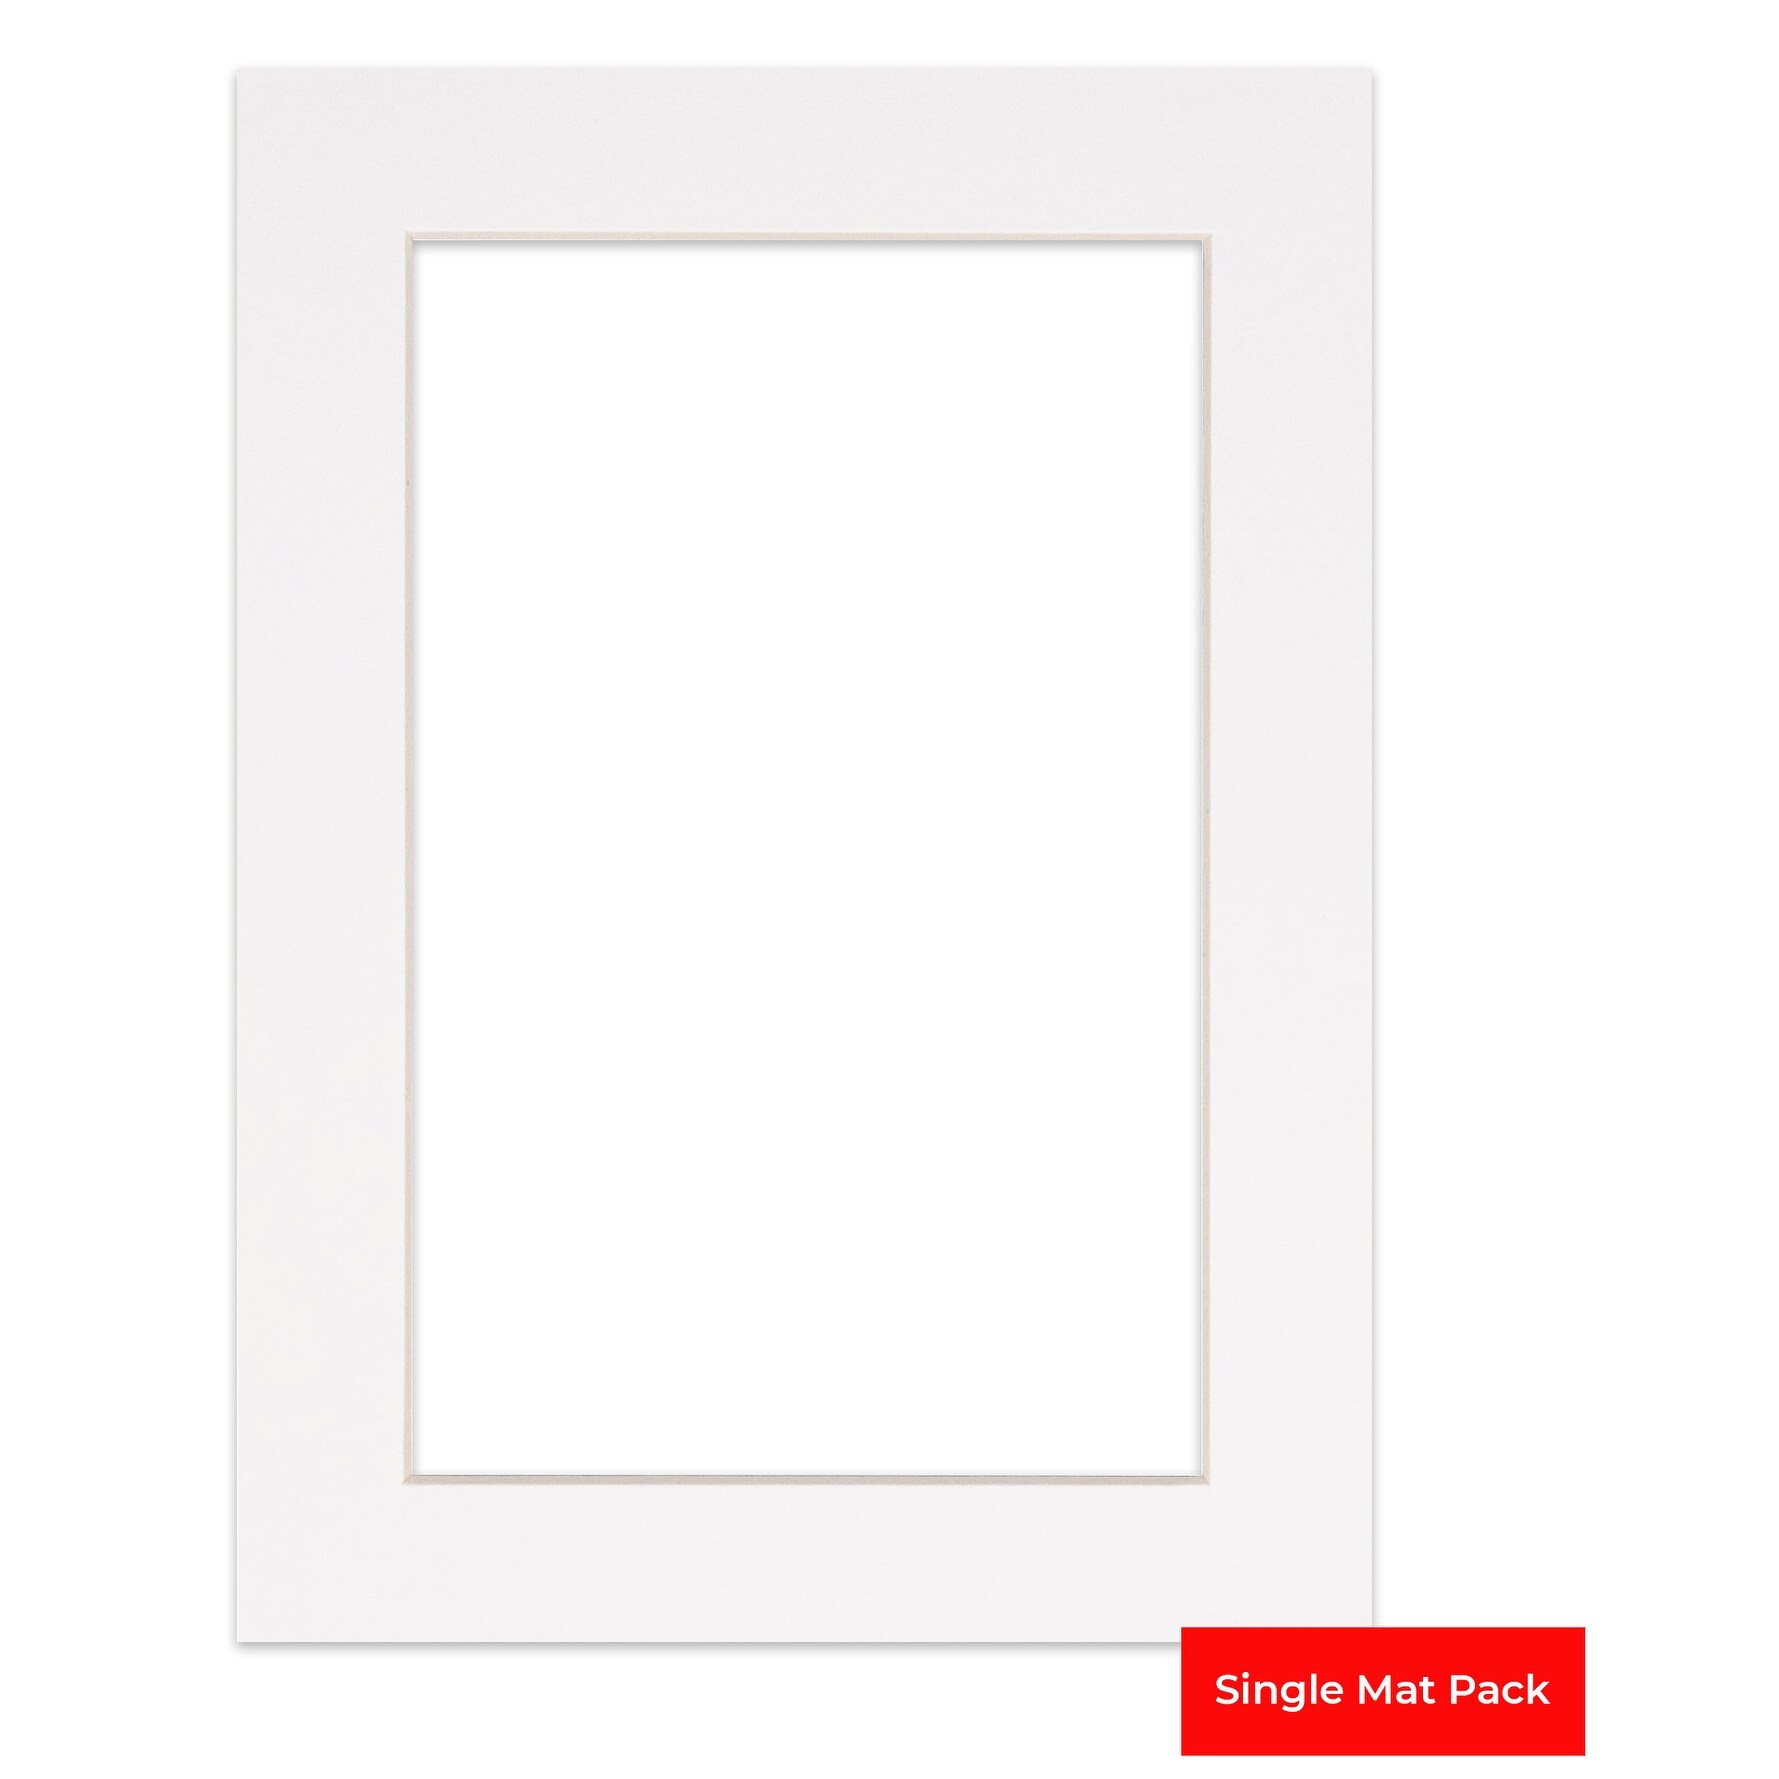 8x10 Mat for 11x14 Frame - Precut Mat Board Acid-Free White 8x10 Photo  Matte Made to Fit a 11x14 Picture Frame, Premium Matboard for Family  Photos